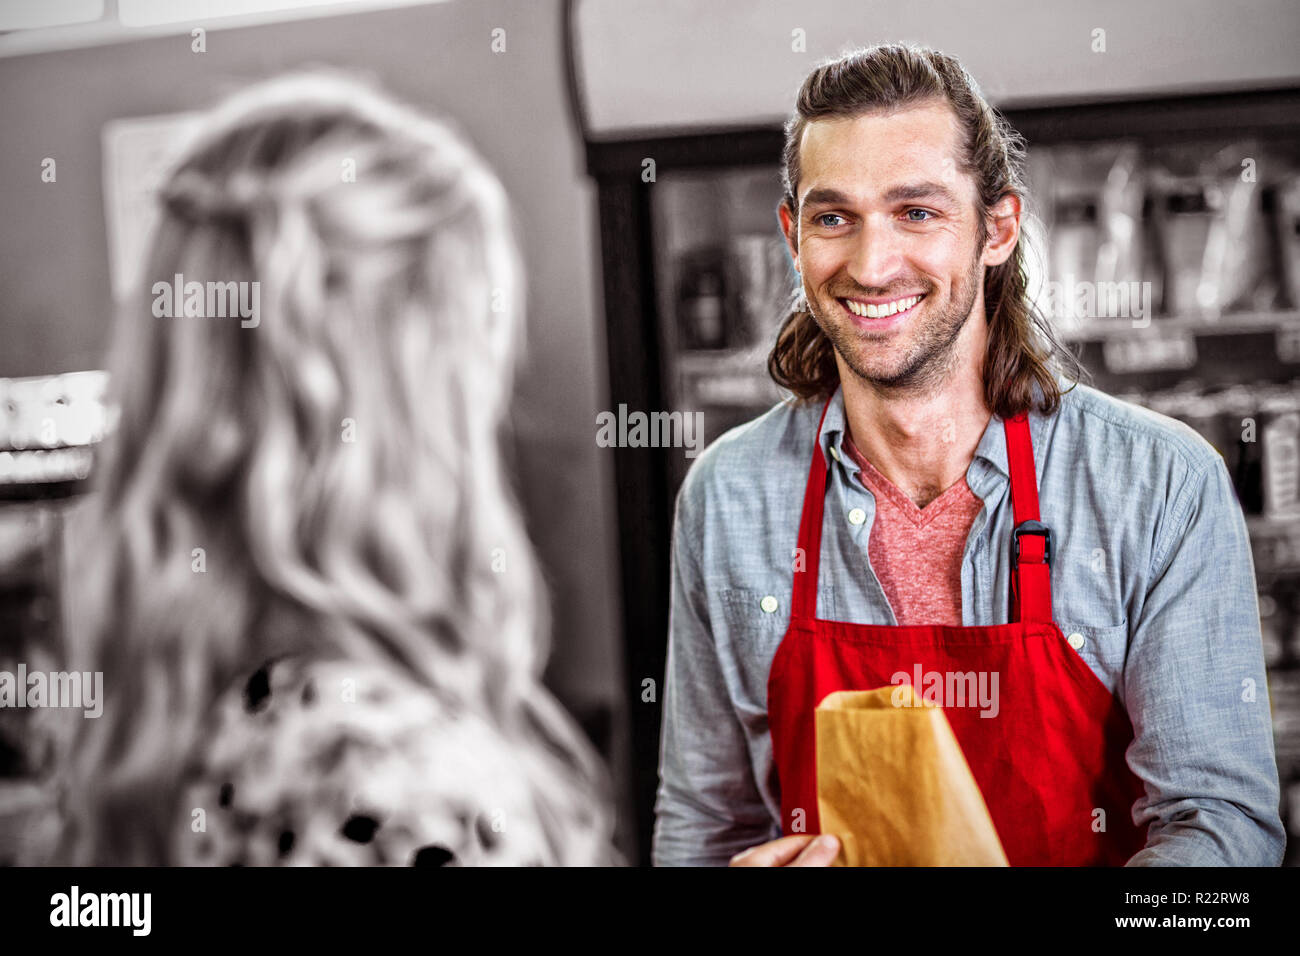 Male staff interacting with woman in supermarket Stock Photo